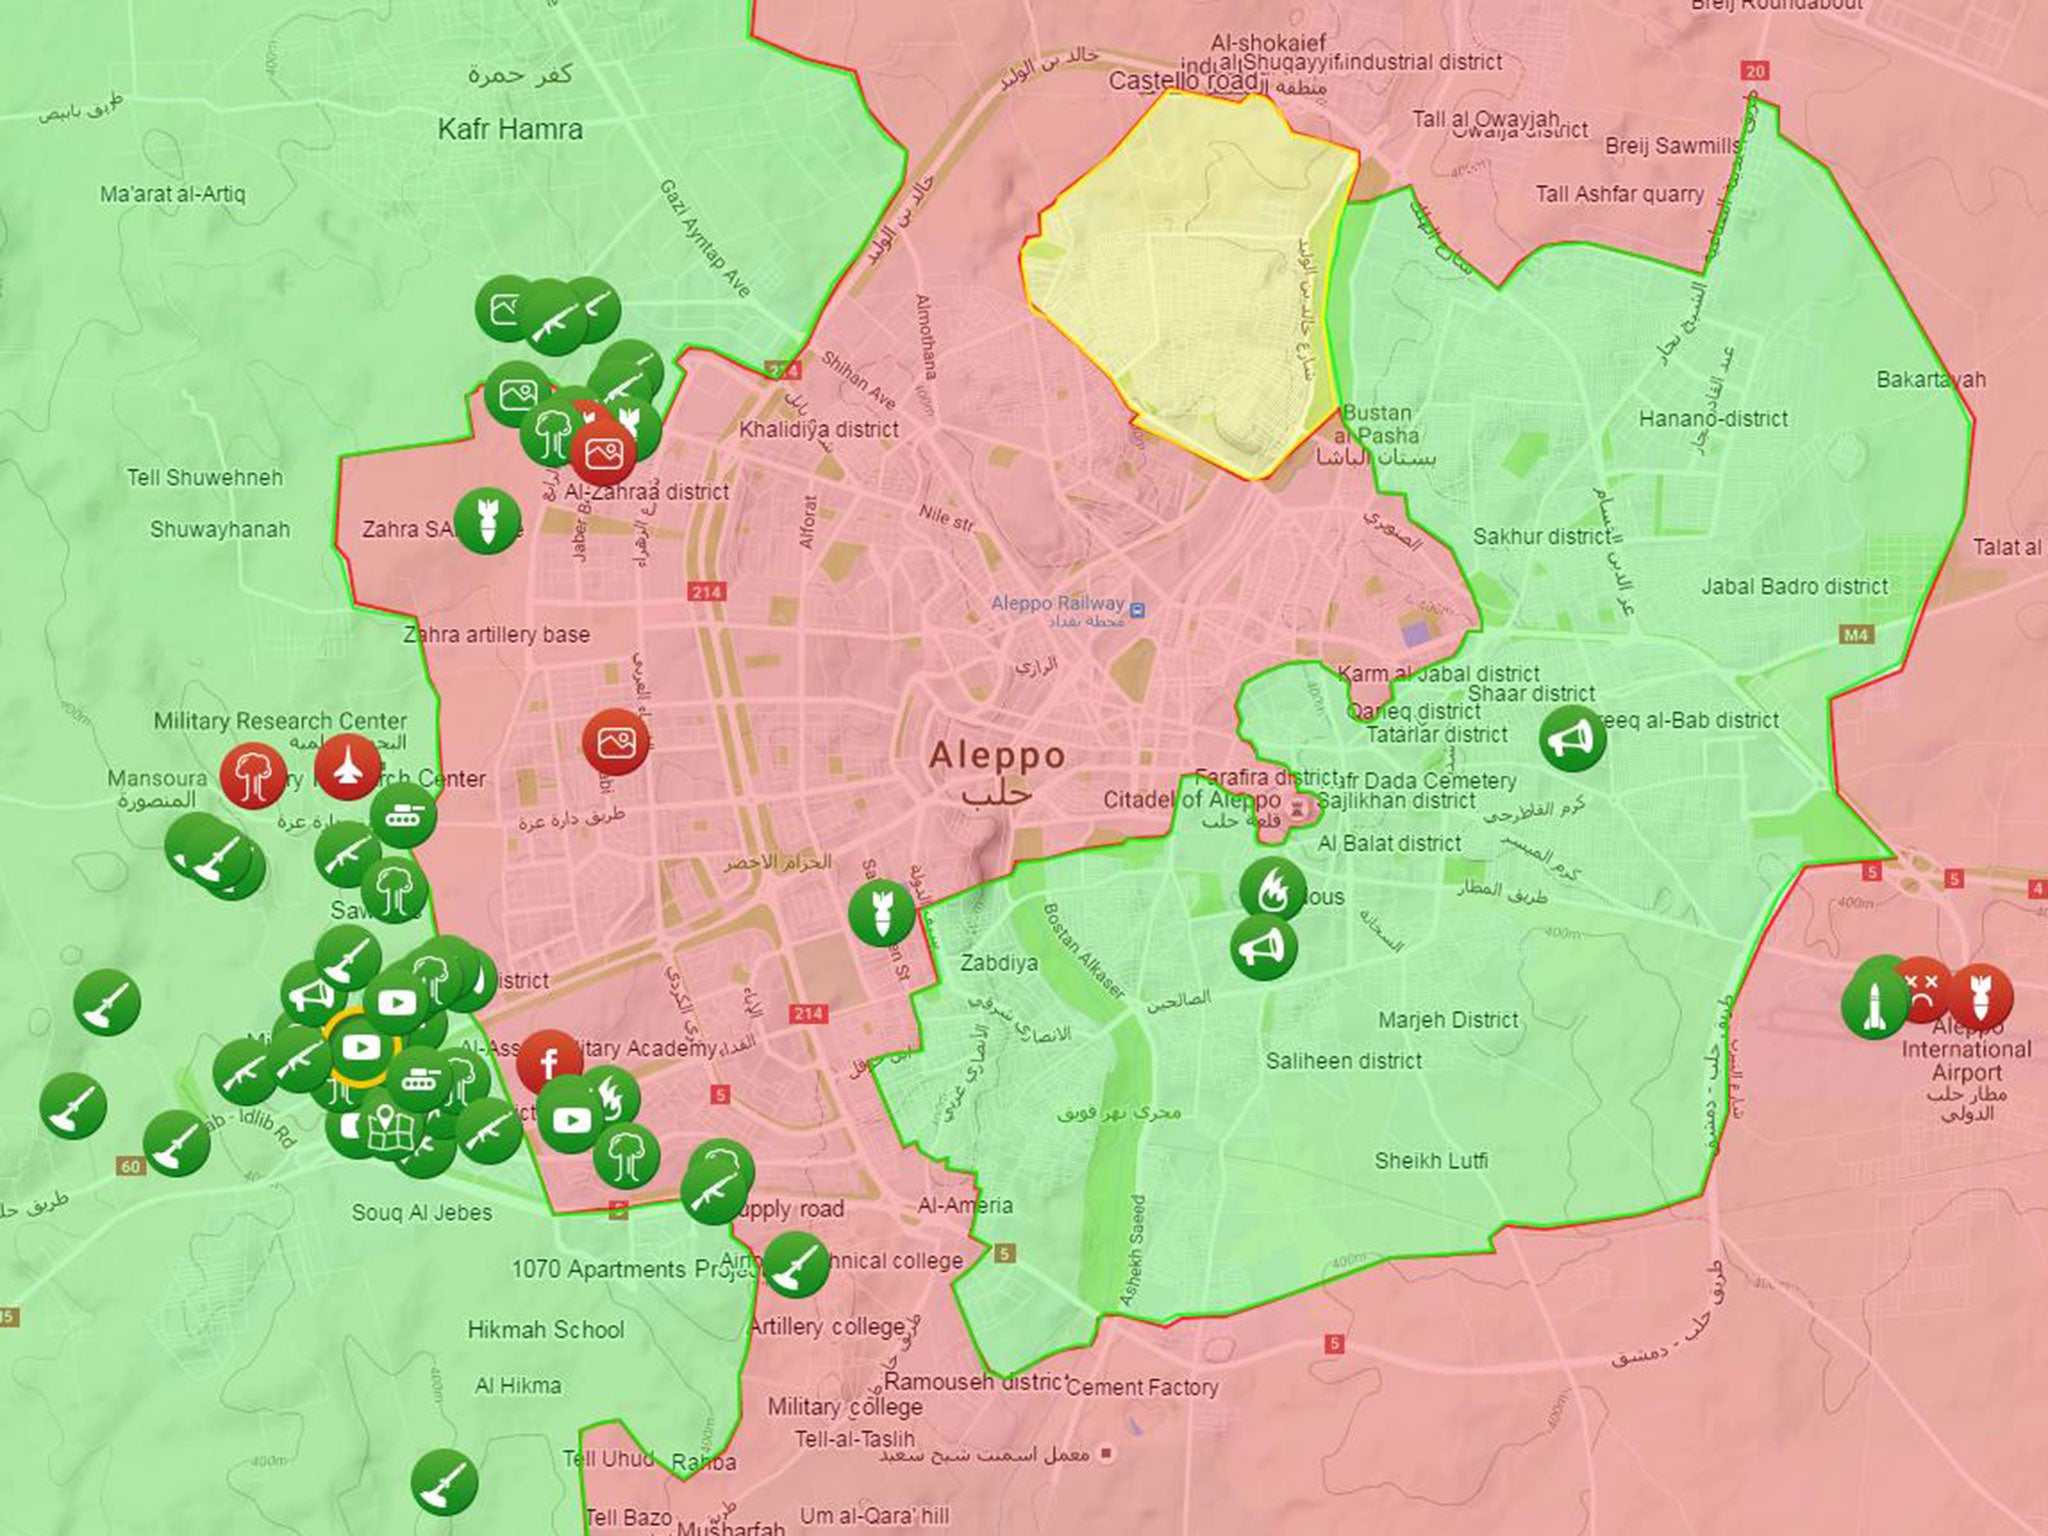 Reported rebel attacks and territory are seen in green, regime in red and Kurdish groups in yellow, in Aleppo on 28 October